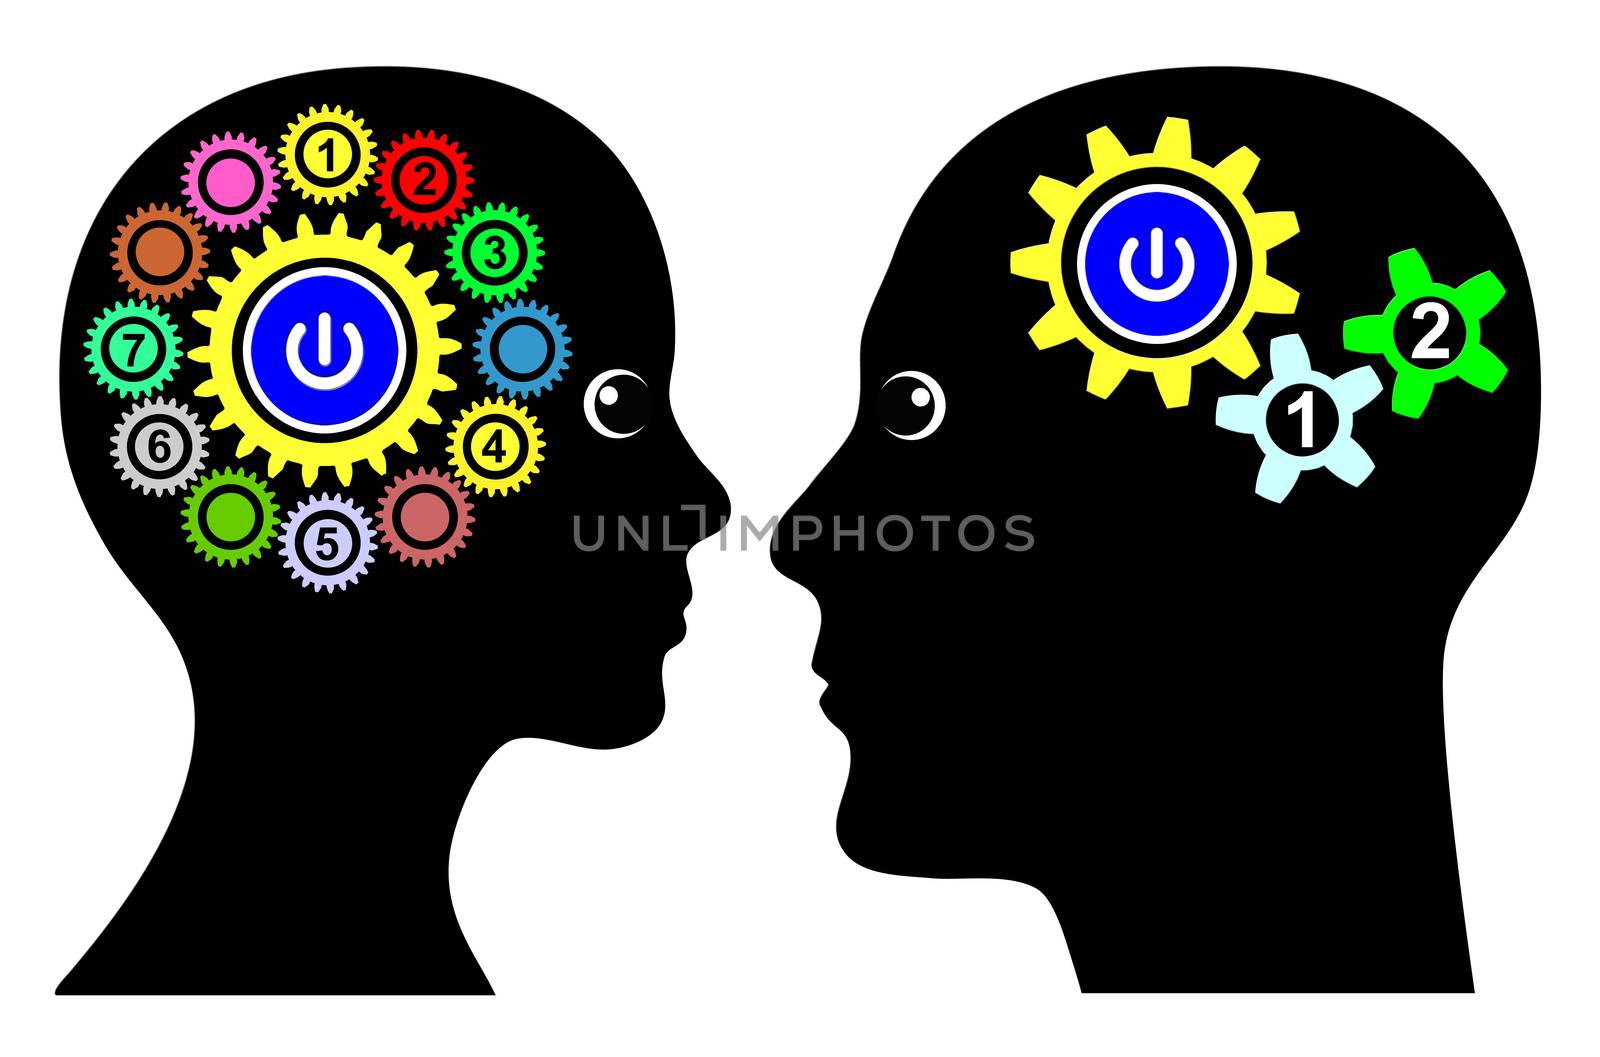 Man and woman with different thinking patterns, multitasking or single tasking when making decision or solving problems